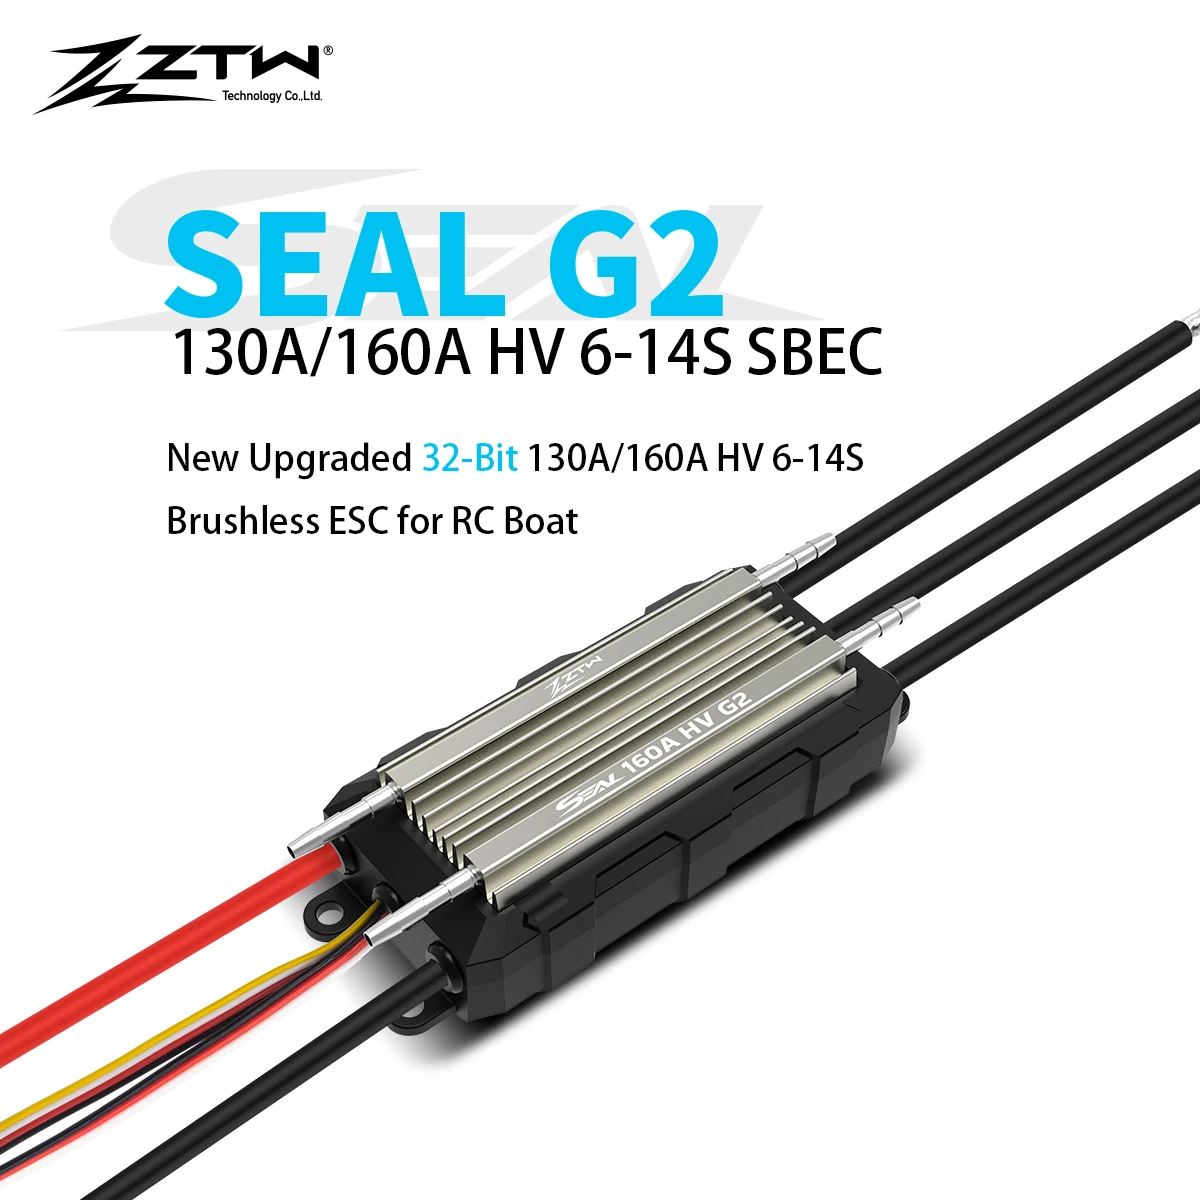 

ZTW 32-Bit Seal G2 130A/160A ESC 6-14S SBEC 6/7.4/8.4V 10A Waterproof Speed Control For RC Boat Underwater Thruster E-Surfboard